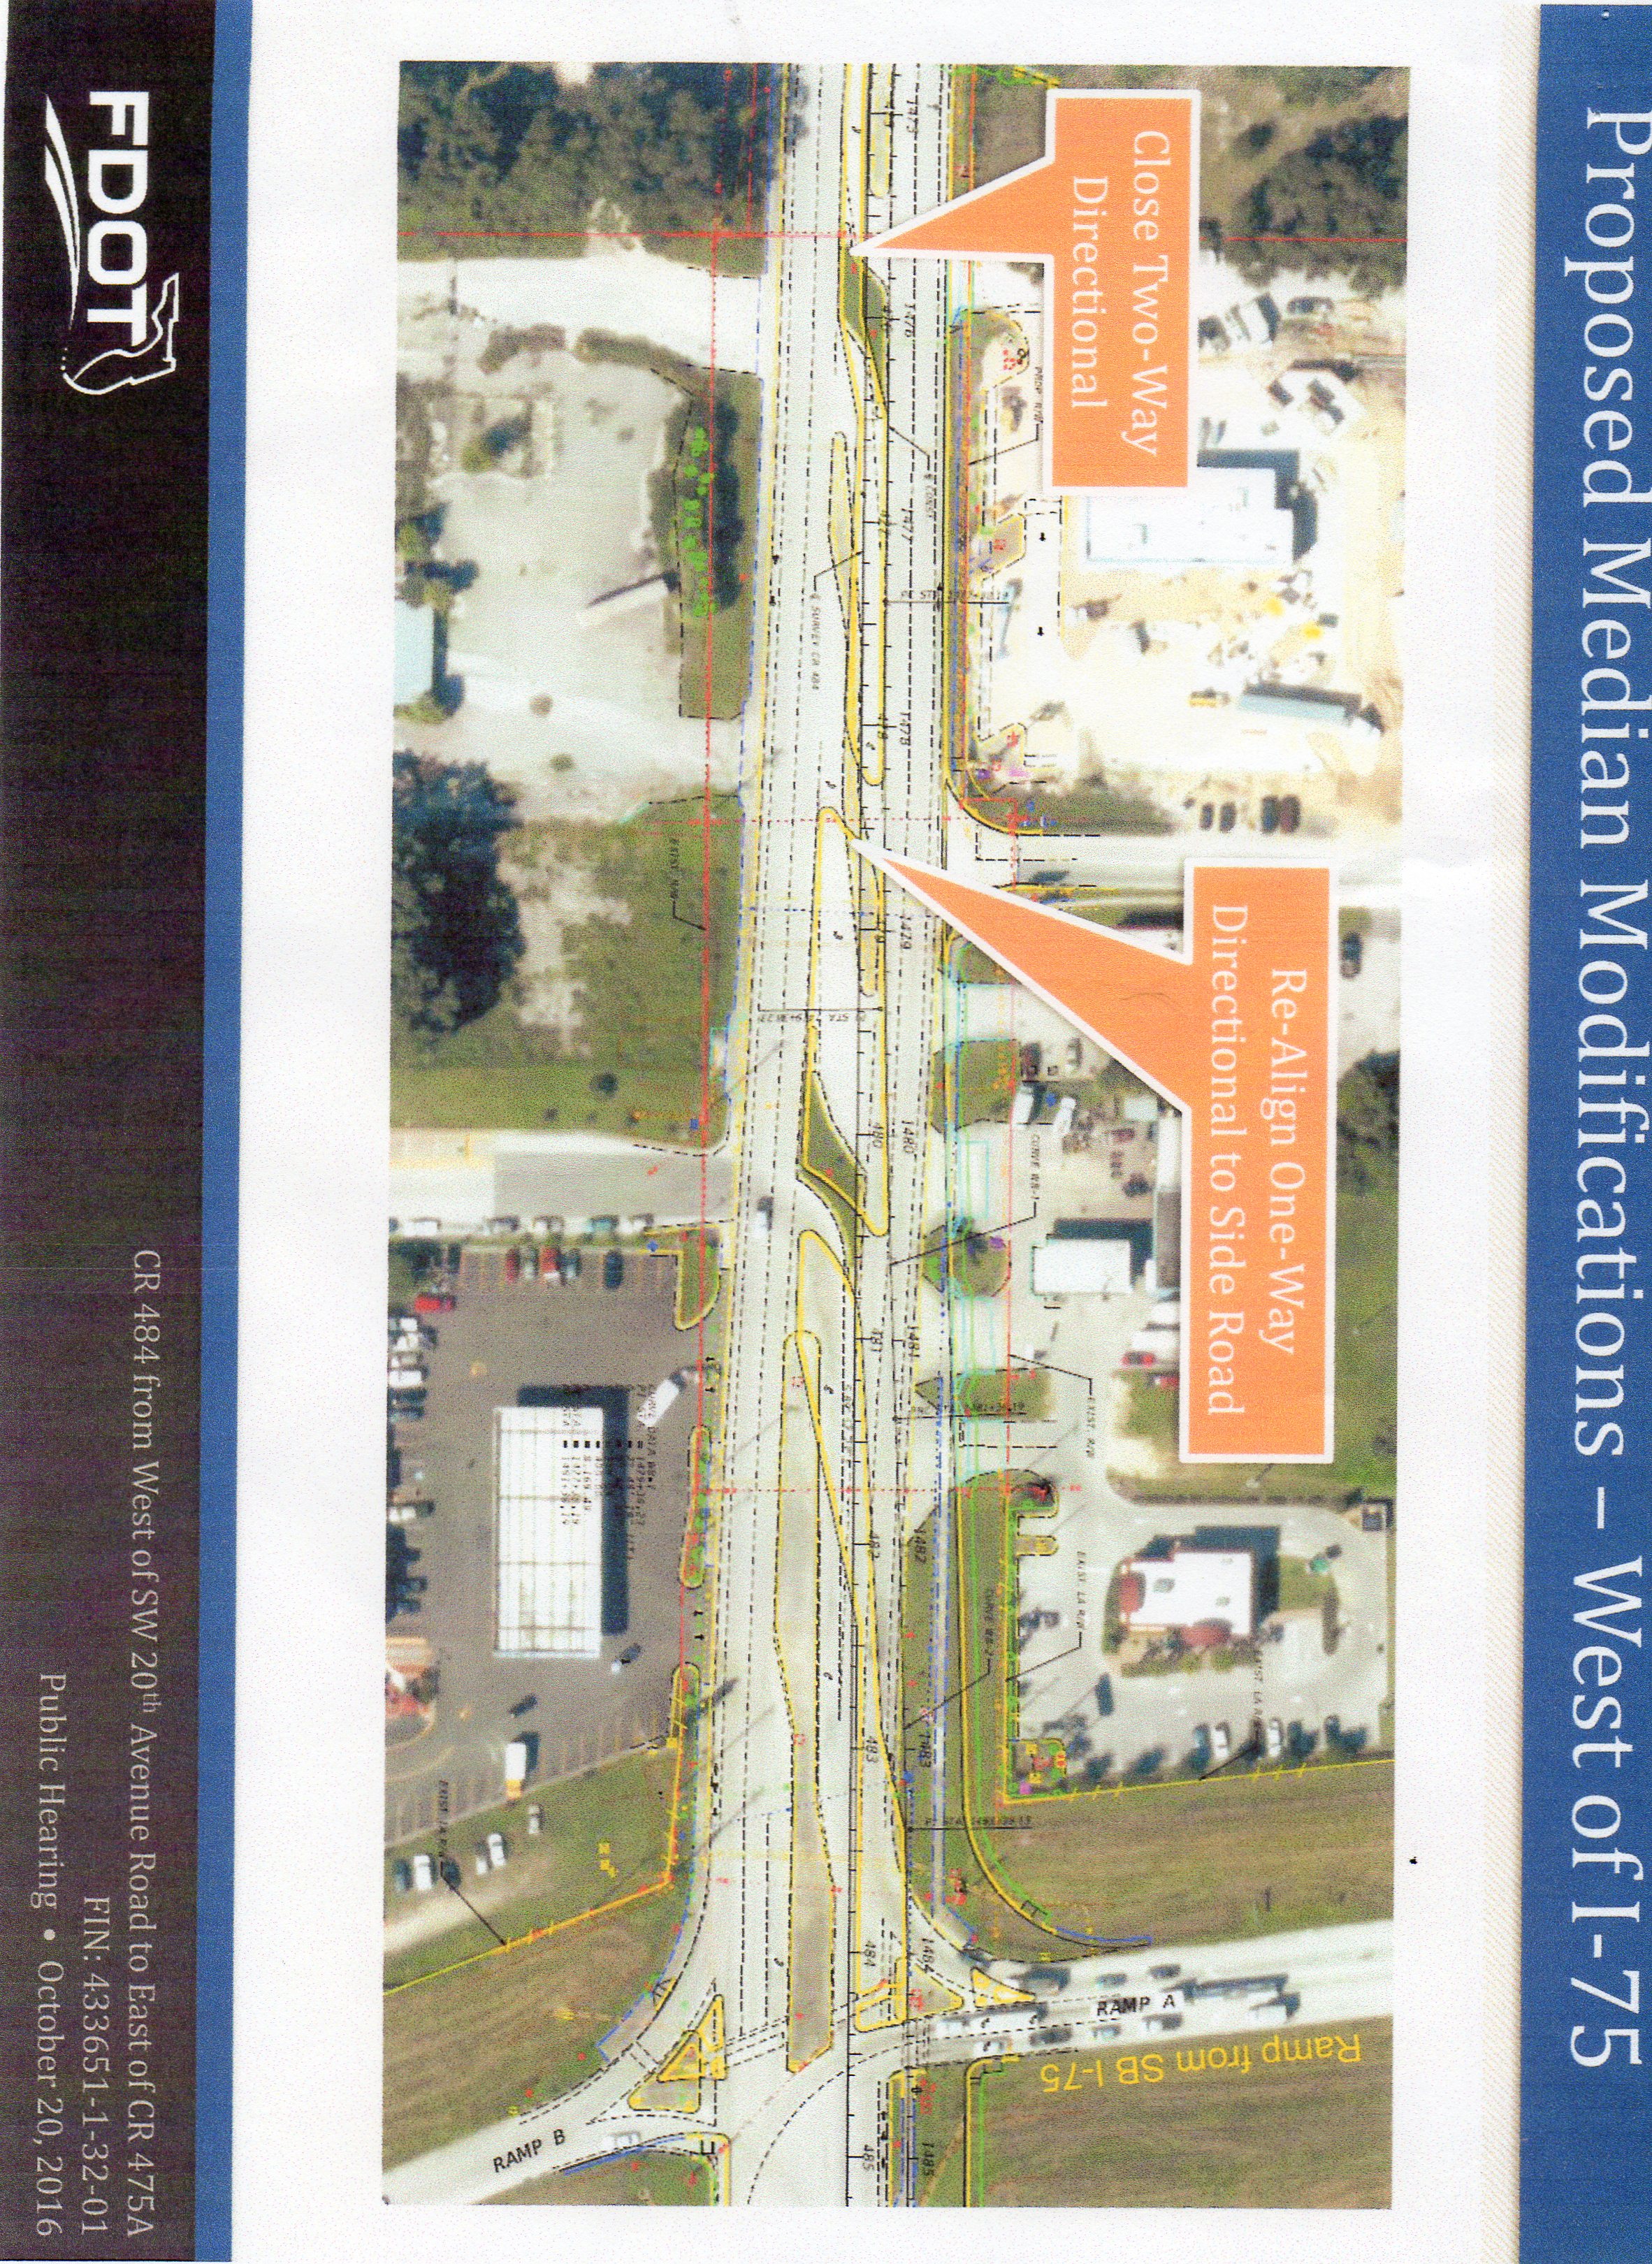 Project Intersection Interstate 75 and RT 484 P6